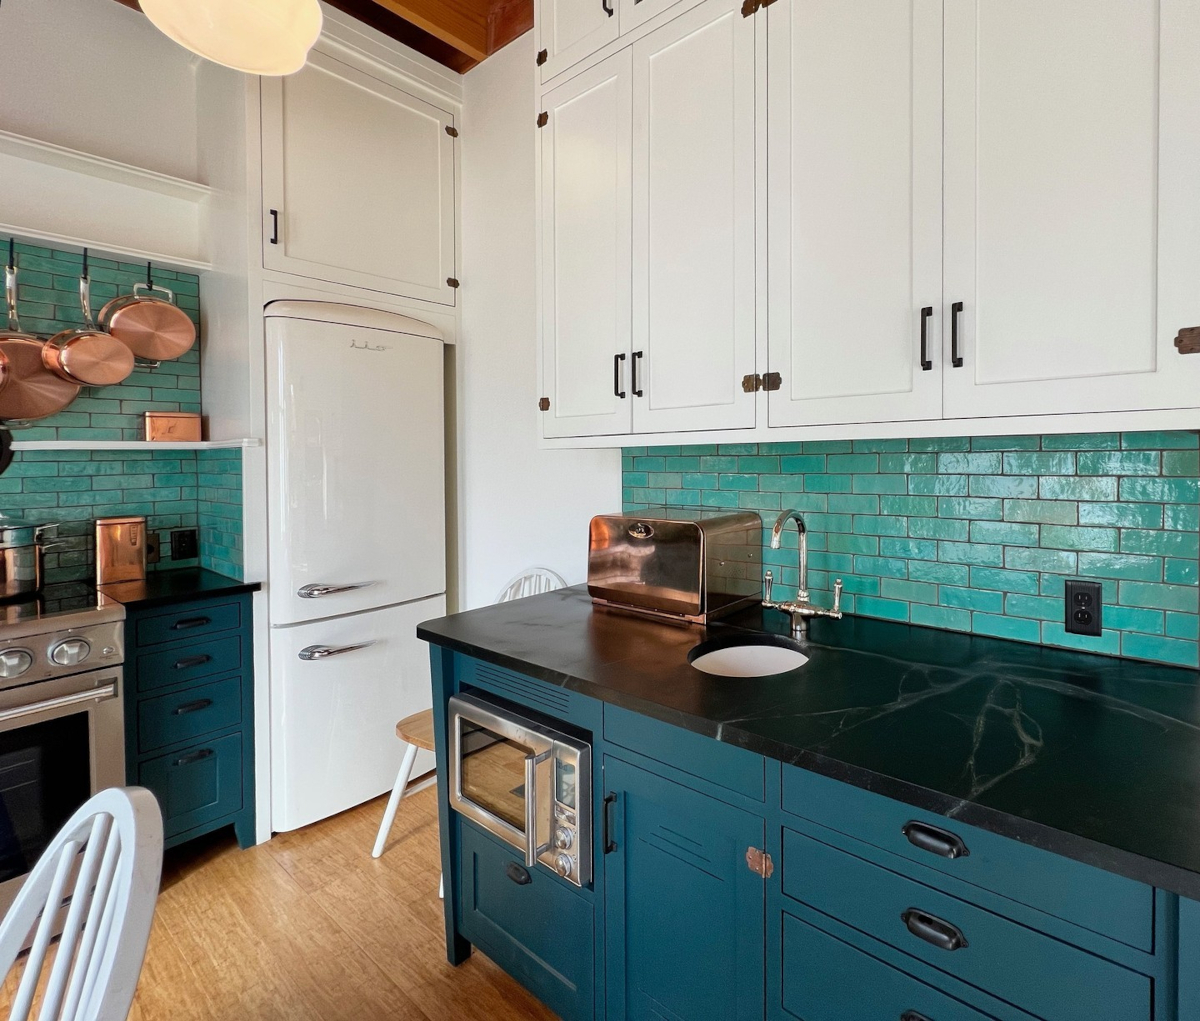 Stylish kitchen with teal tile backsplash, white and blue cabinets, and retro appliances